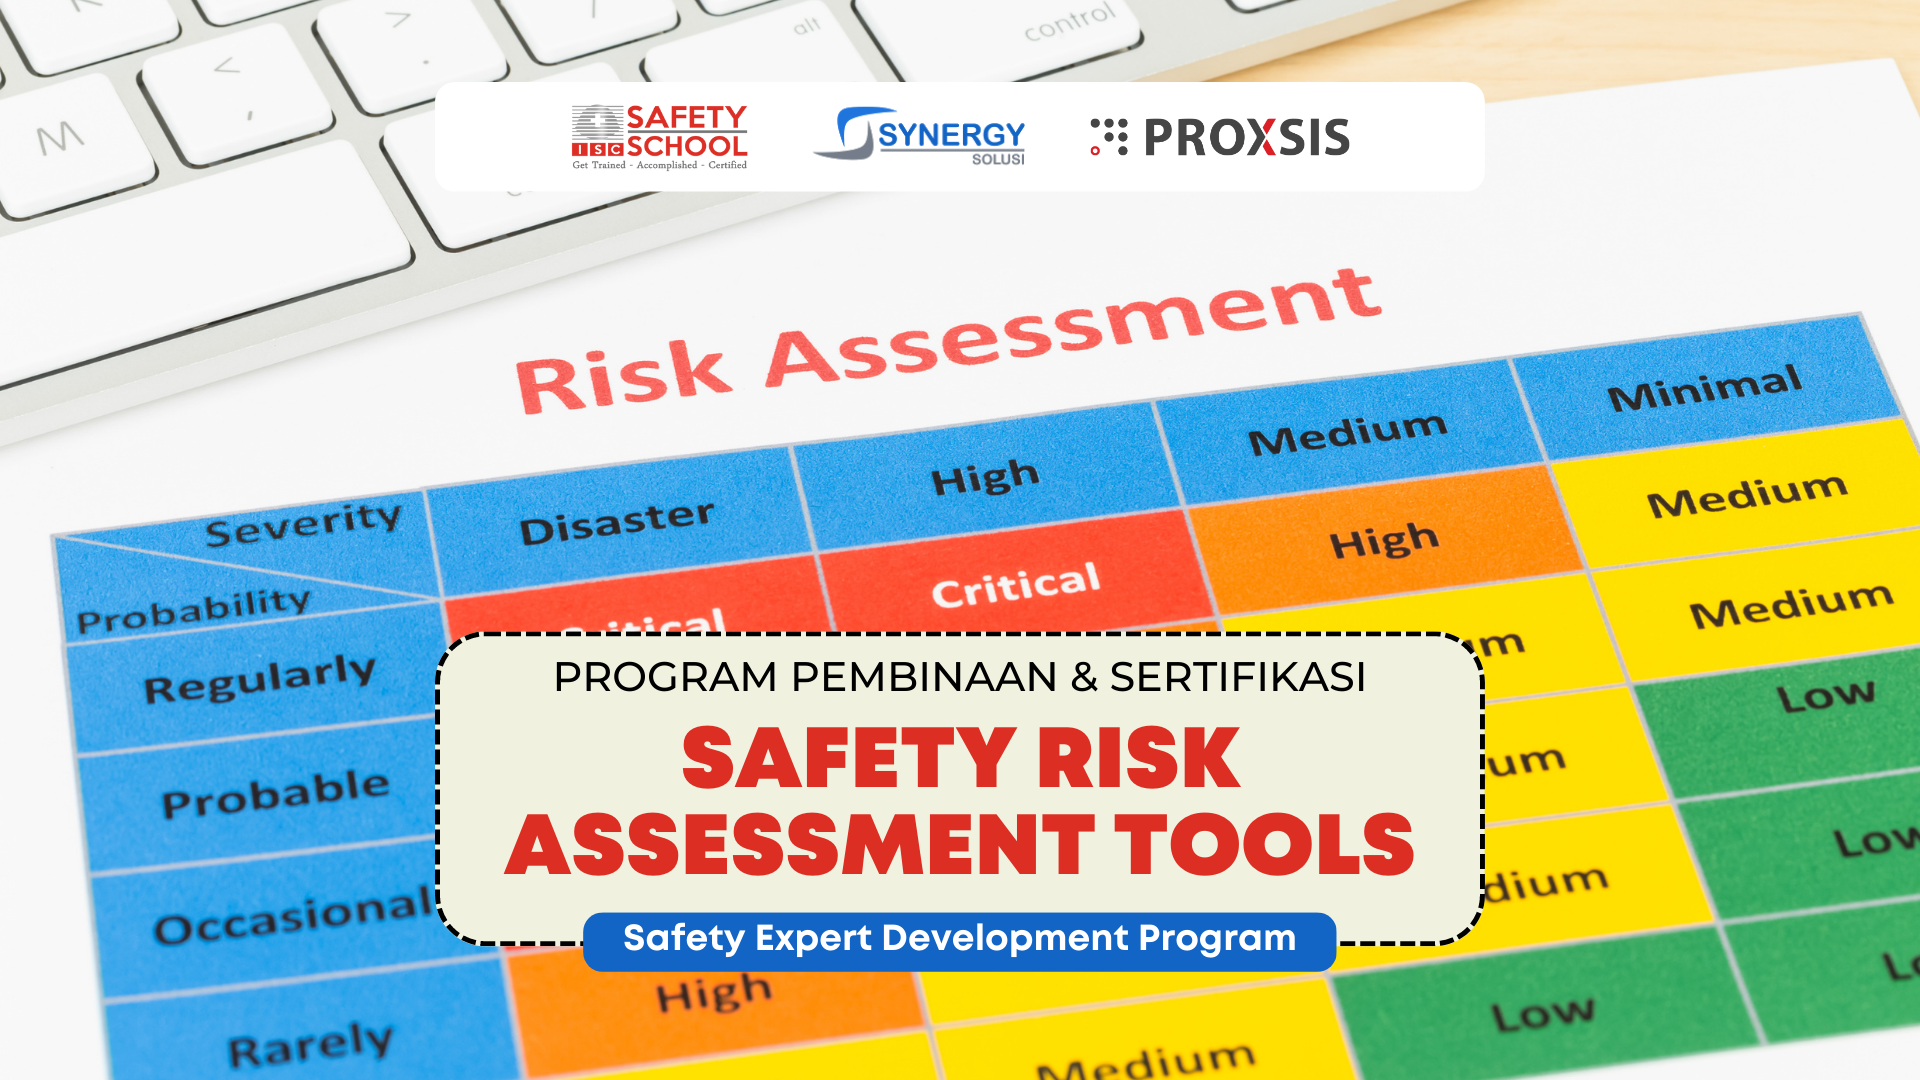 Training Safety risk assessment tools